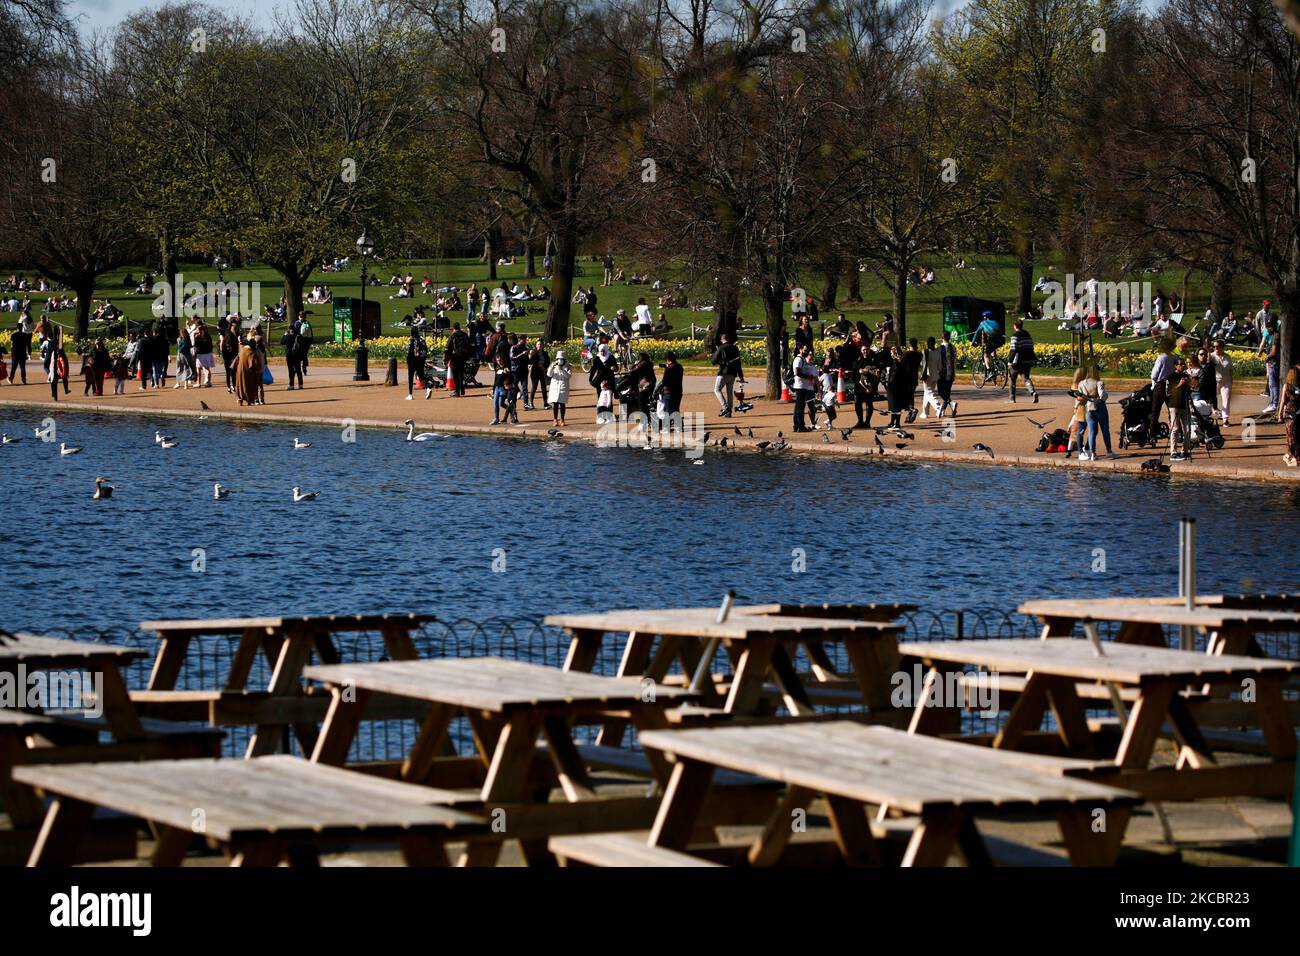 People walk in warm spring sunshine as empty tables sit out in the temporarily-closed outdoor seating area of a cafe beside the Serpentine lake in Hyde Park in London, England, on March 29, 2021. Lockdown restrictions were eased across England today, with the 'stay home' rule ended, groups of up to six allowed to meet outside, outdoor sports restarted and weddings with up to six people attending permitted to go ahead. Shops, hospitality and leisure businesses remain closed however, with the next relaxation of restrictions not due until April 12 at the earliest. Today's easing has meanwhile coi Stock Photo